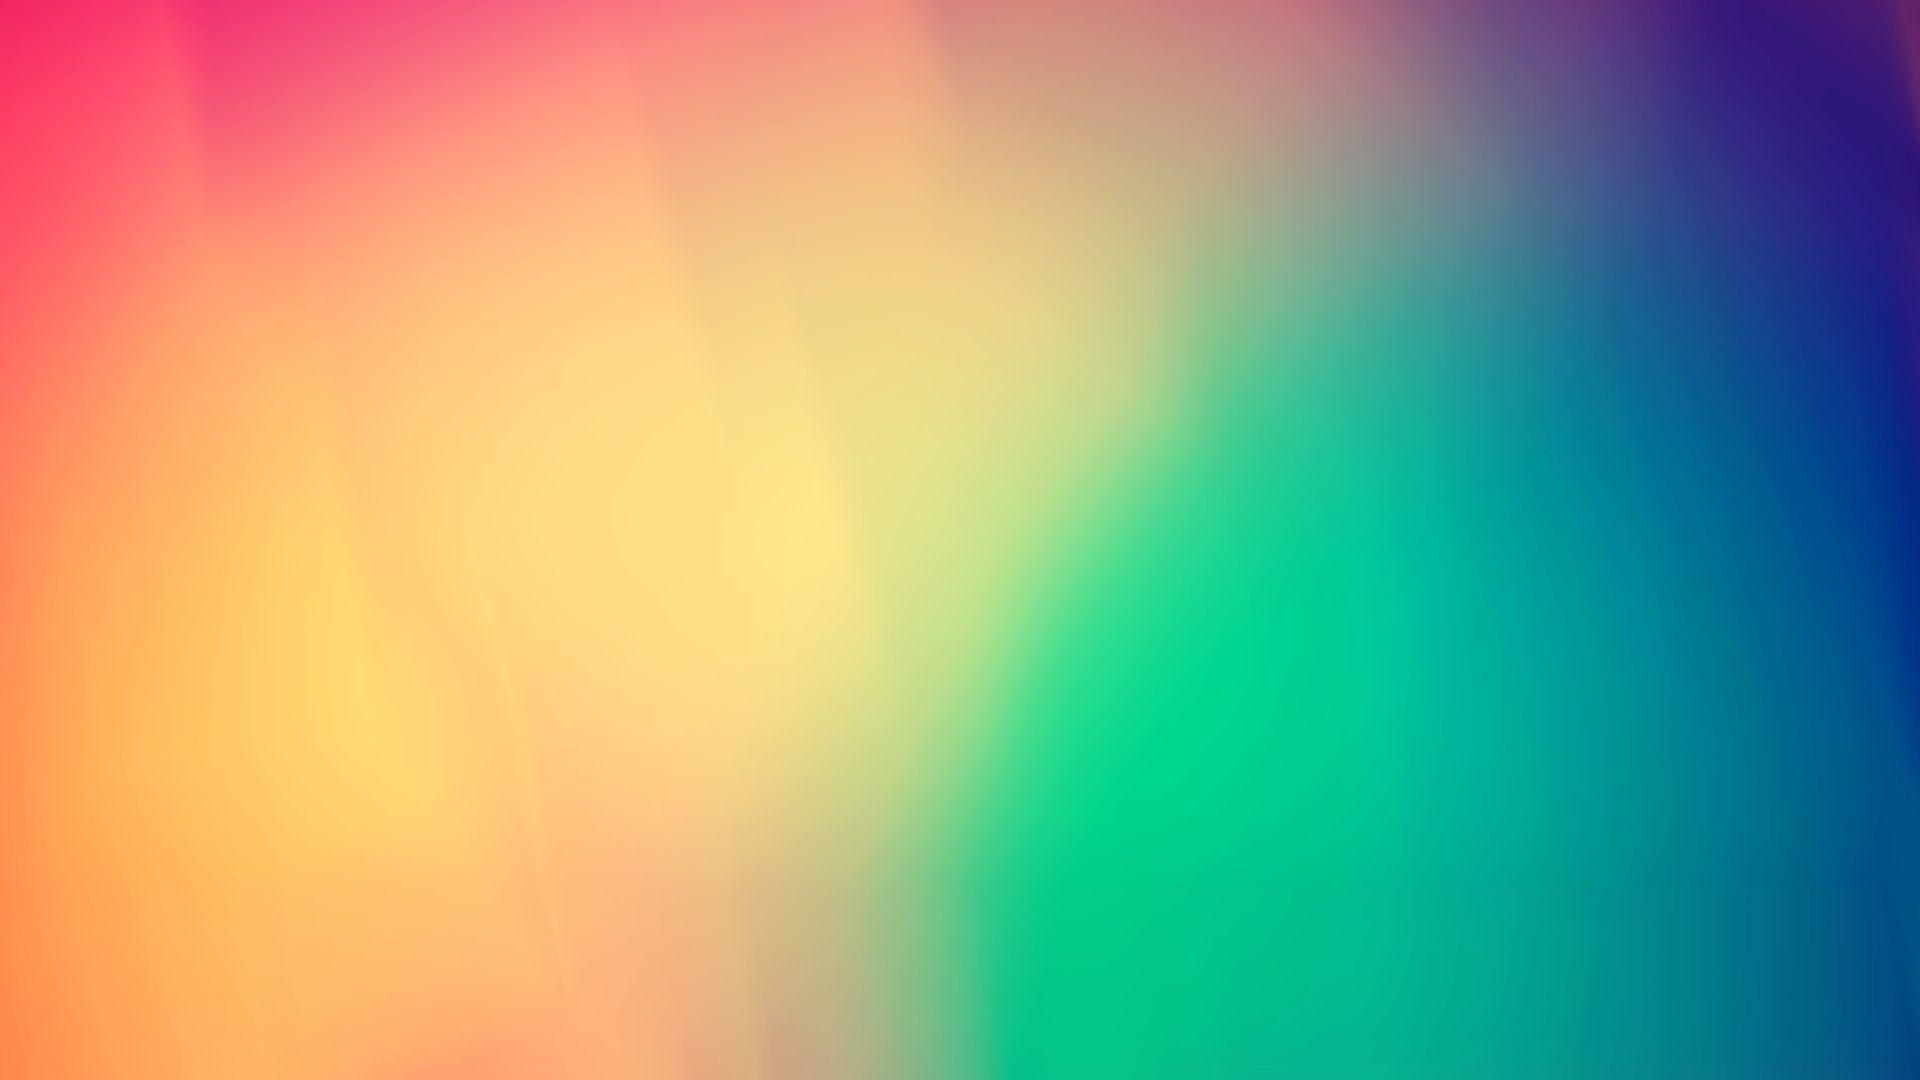 Background // Textures. Colorful wallpaper, Free background image, Background image